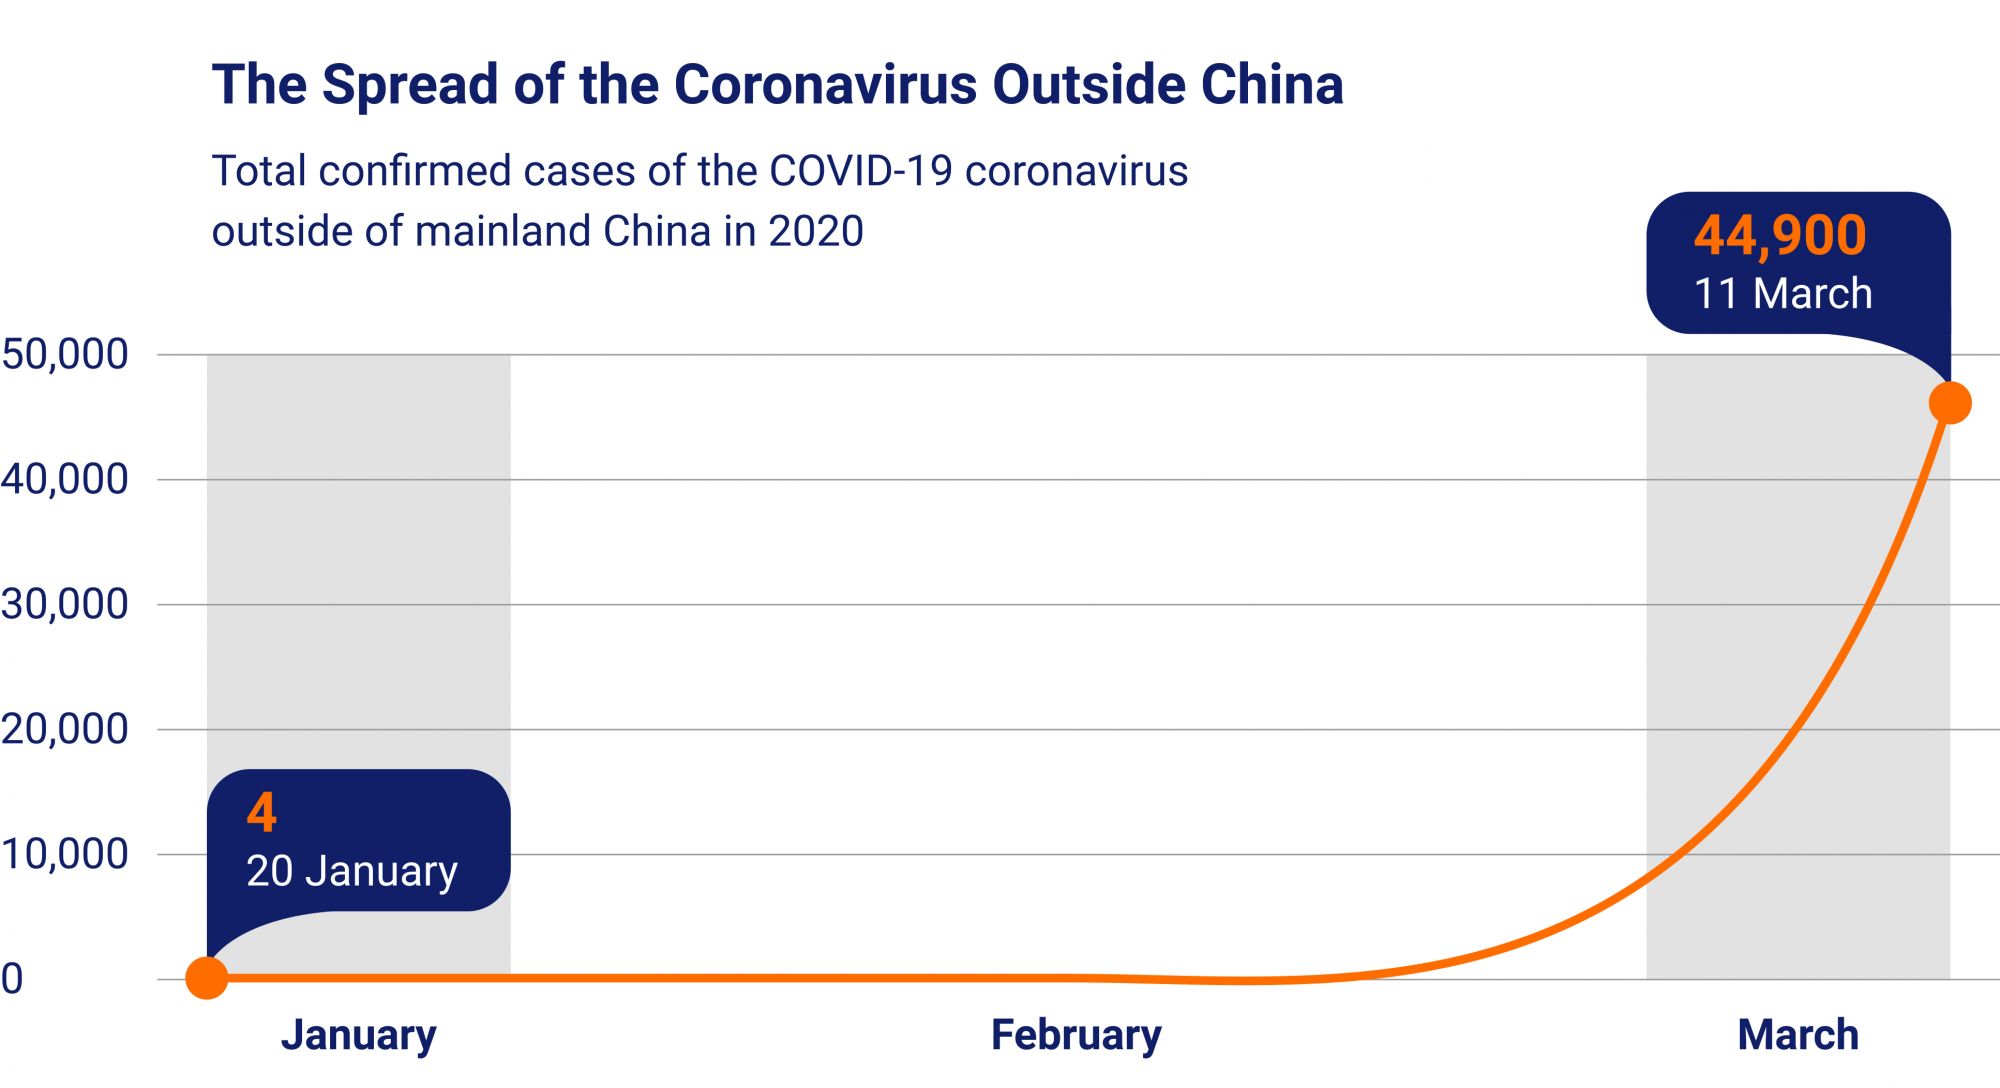 Covid-19 outbreak outside China, January–March 2020